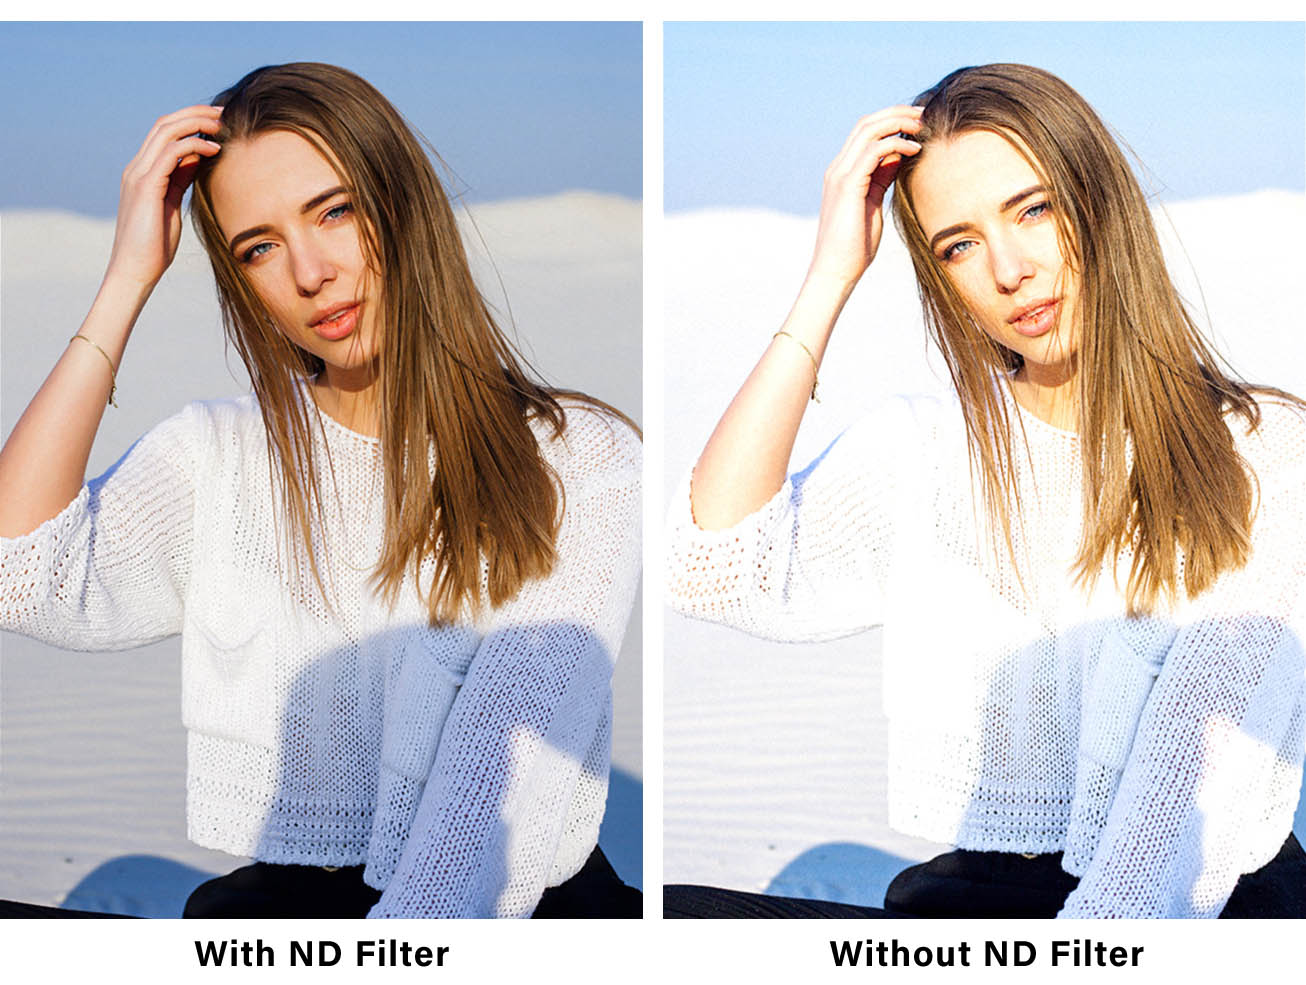 Images taken with and without the Obsbot ND filters